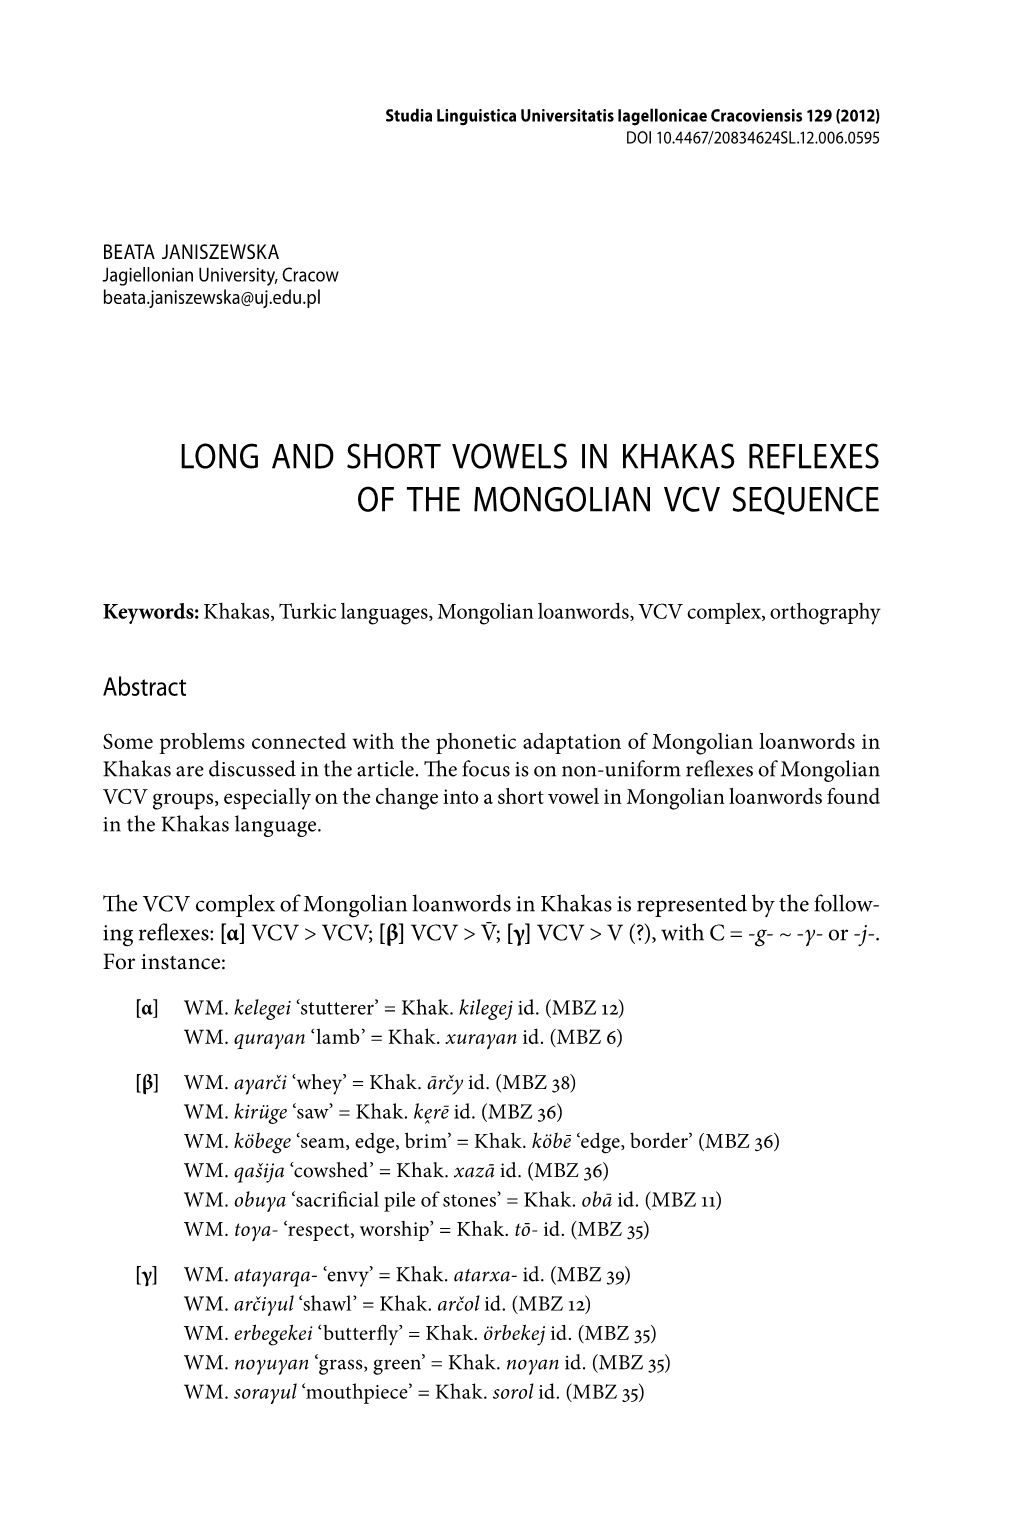 Long and Short Vowels in Khakas Reflexes of the Mongolian Vcv Sequence